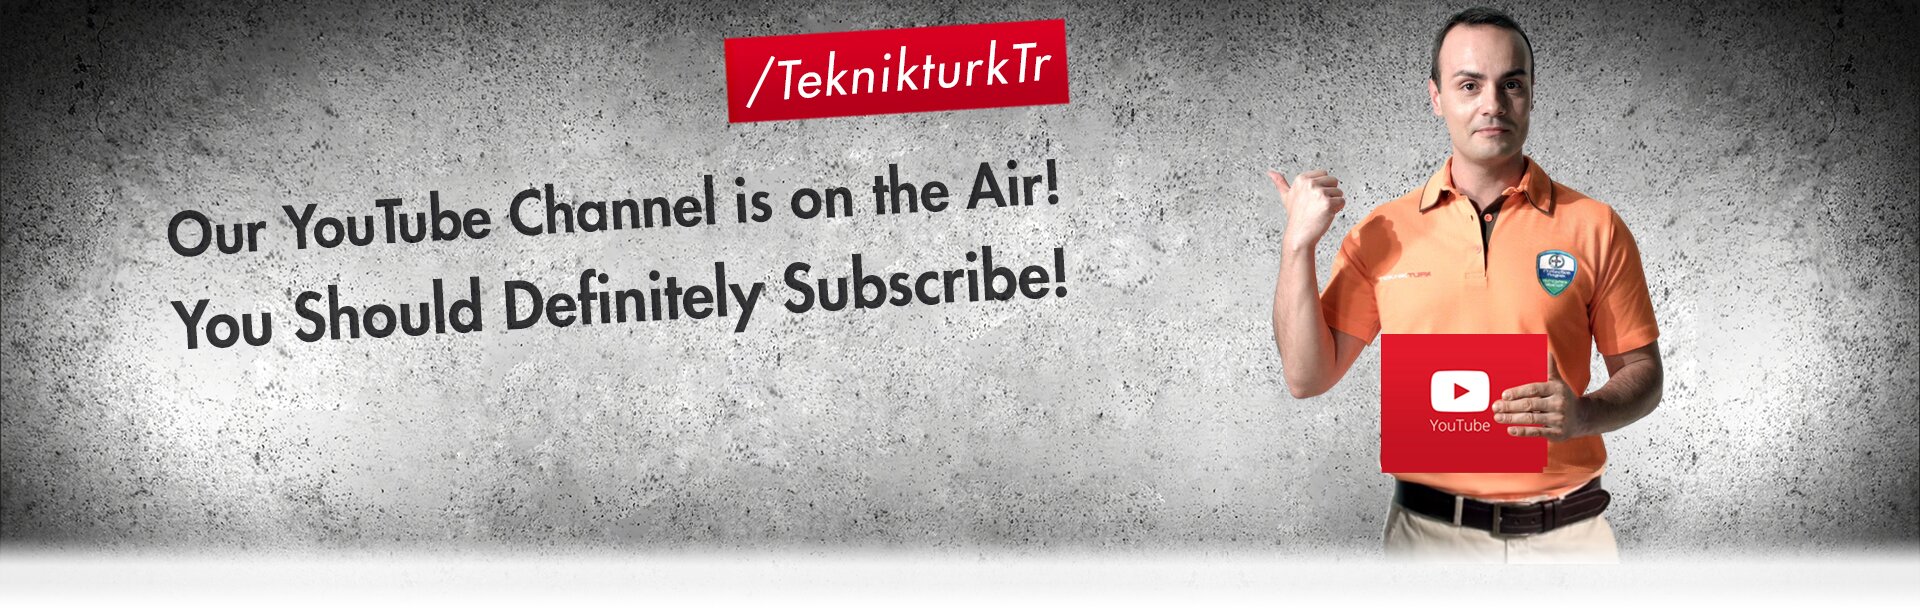 Our YouTube Channel is the on Air! You should definitely subscribe!